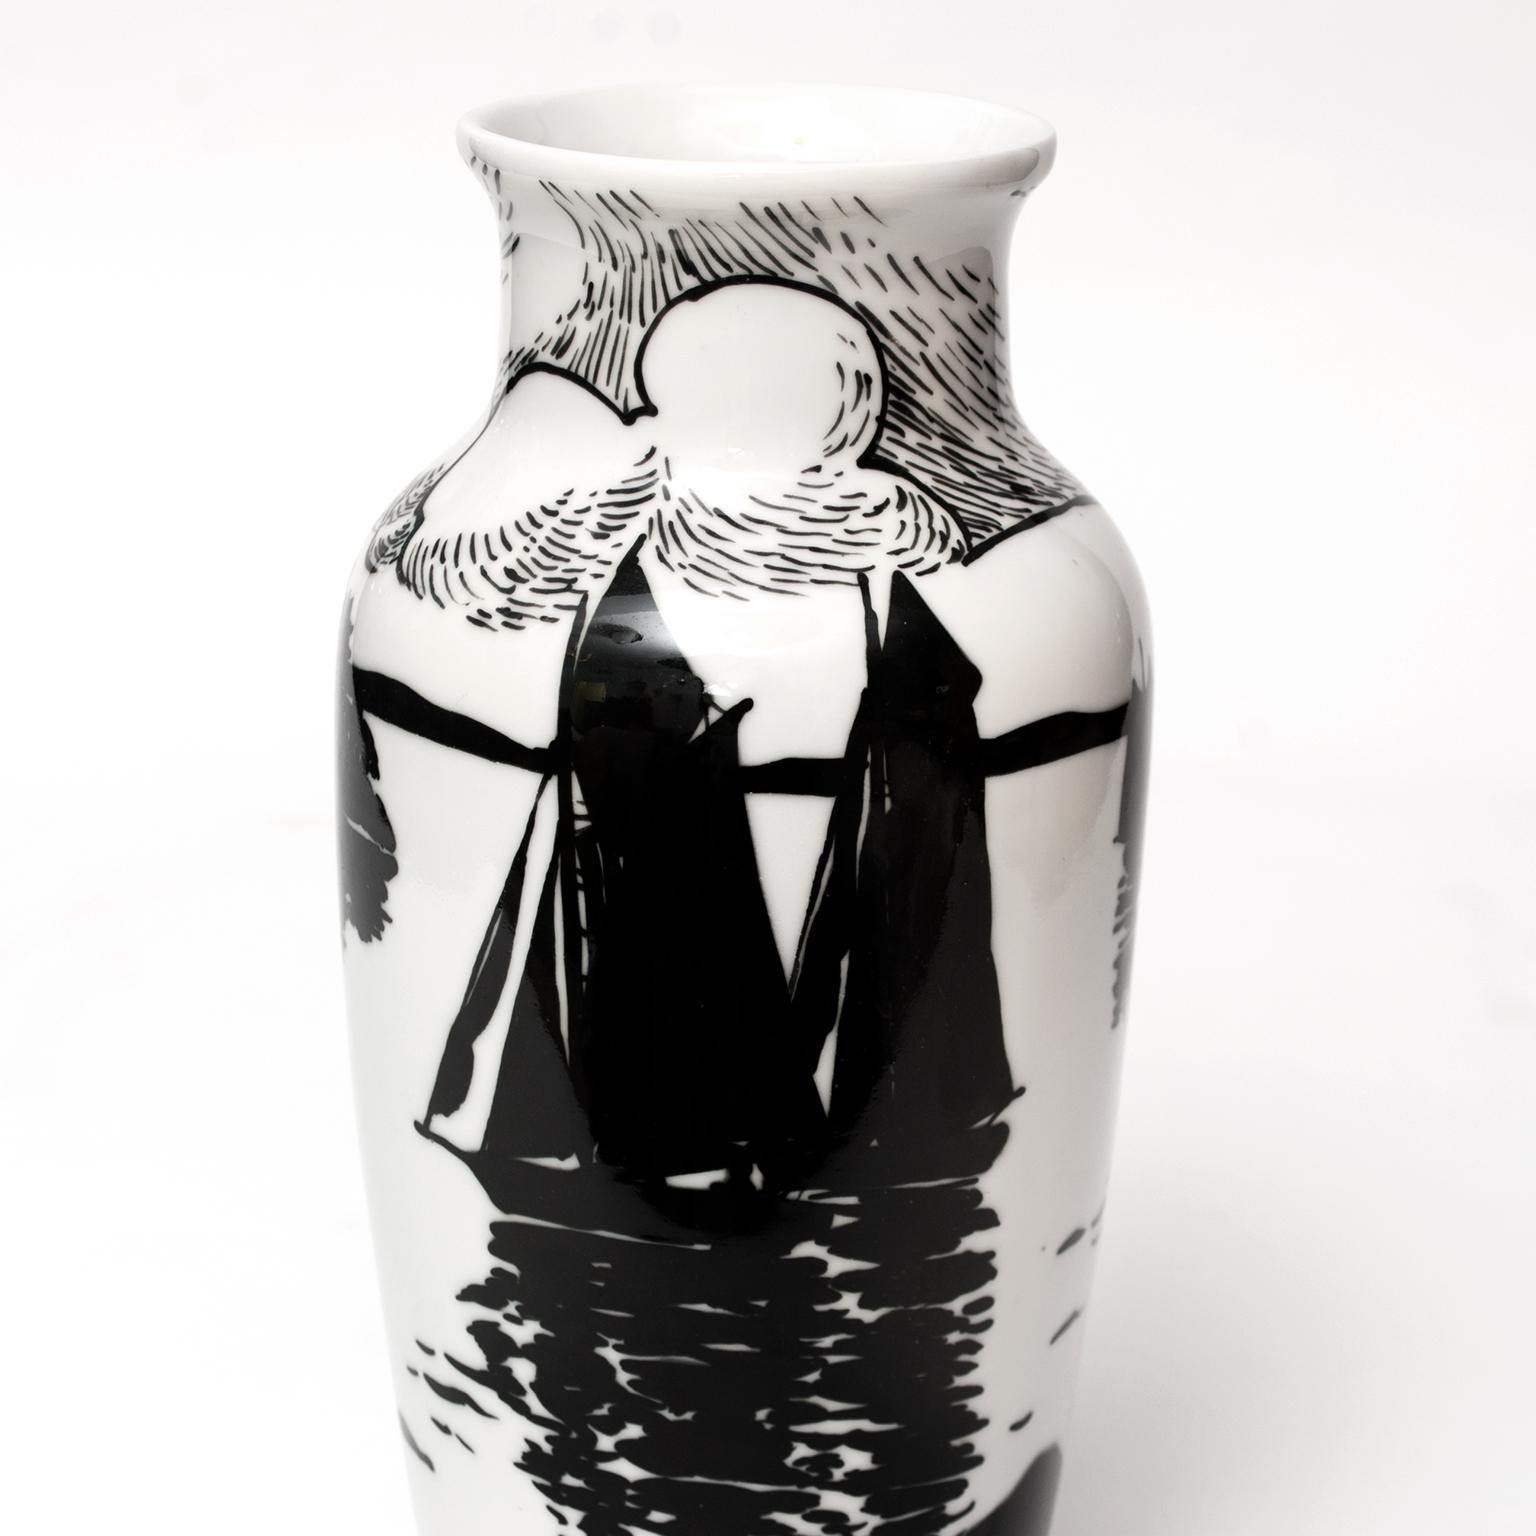 Swedish Art Deco Porcelain Vase by Algot Eriksson, for ALP, Lidkoping In Good Condition For Sale In New York, NY